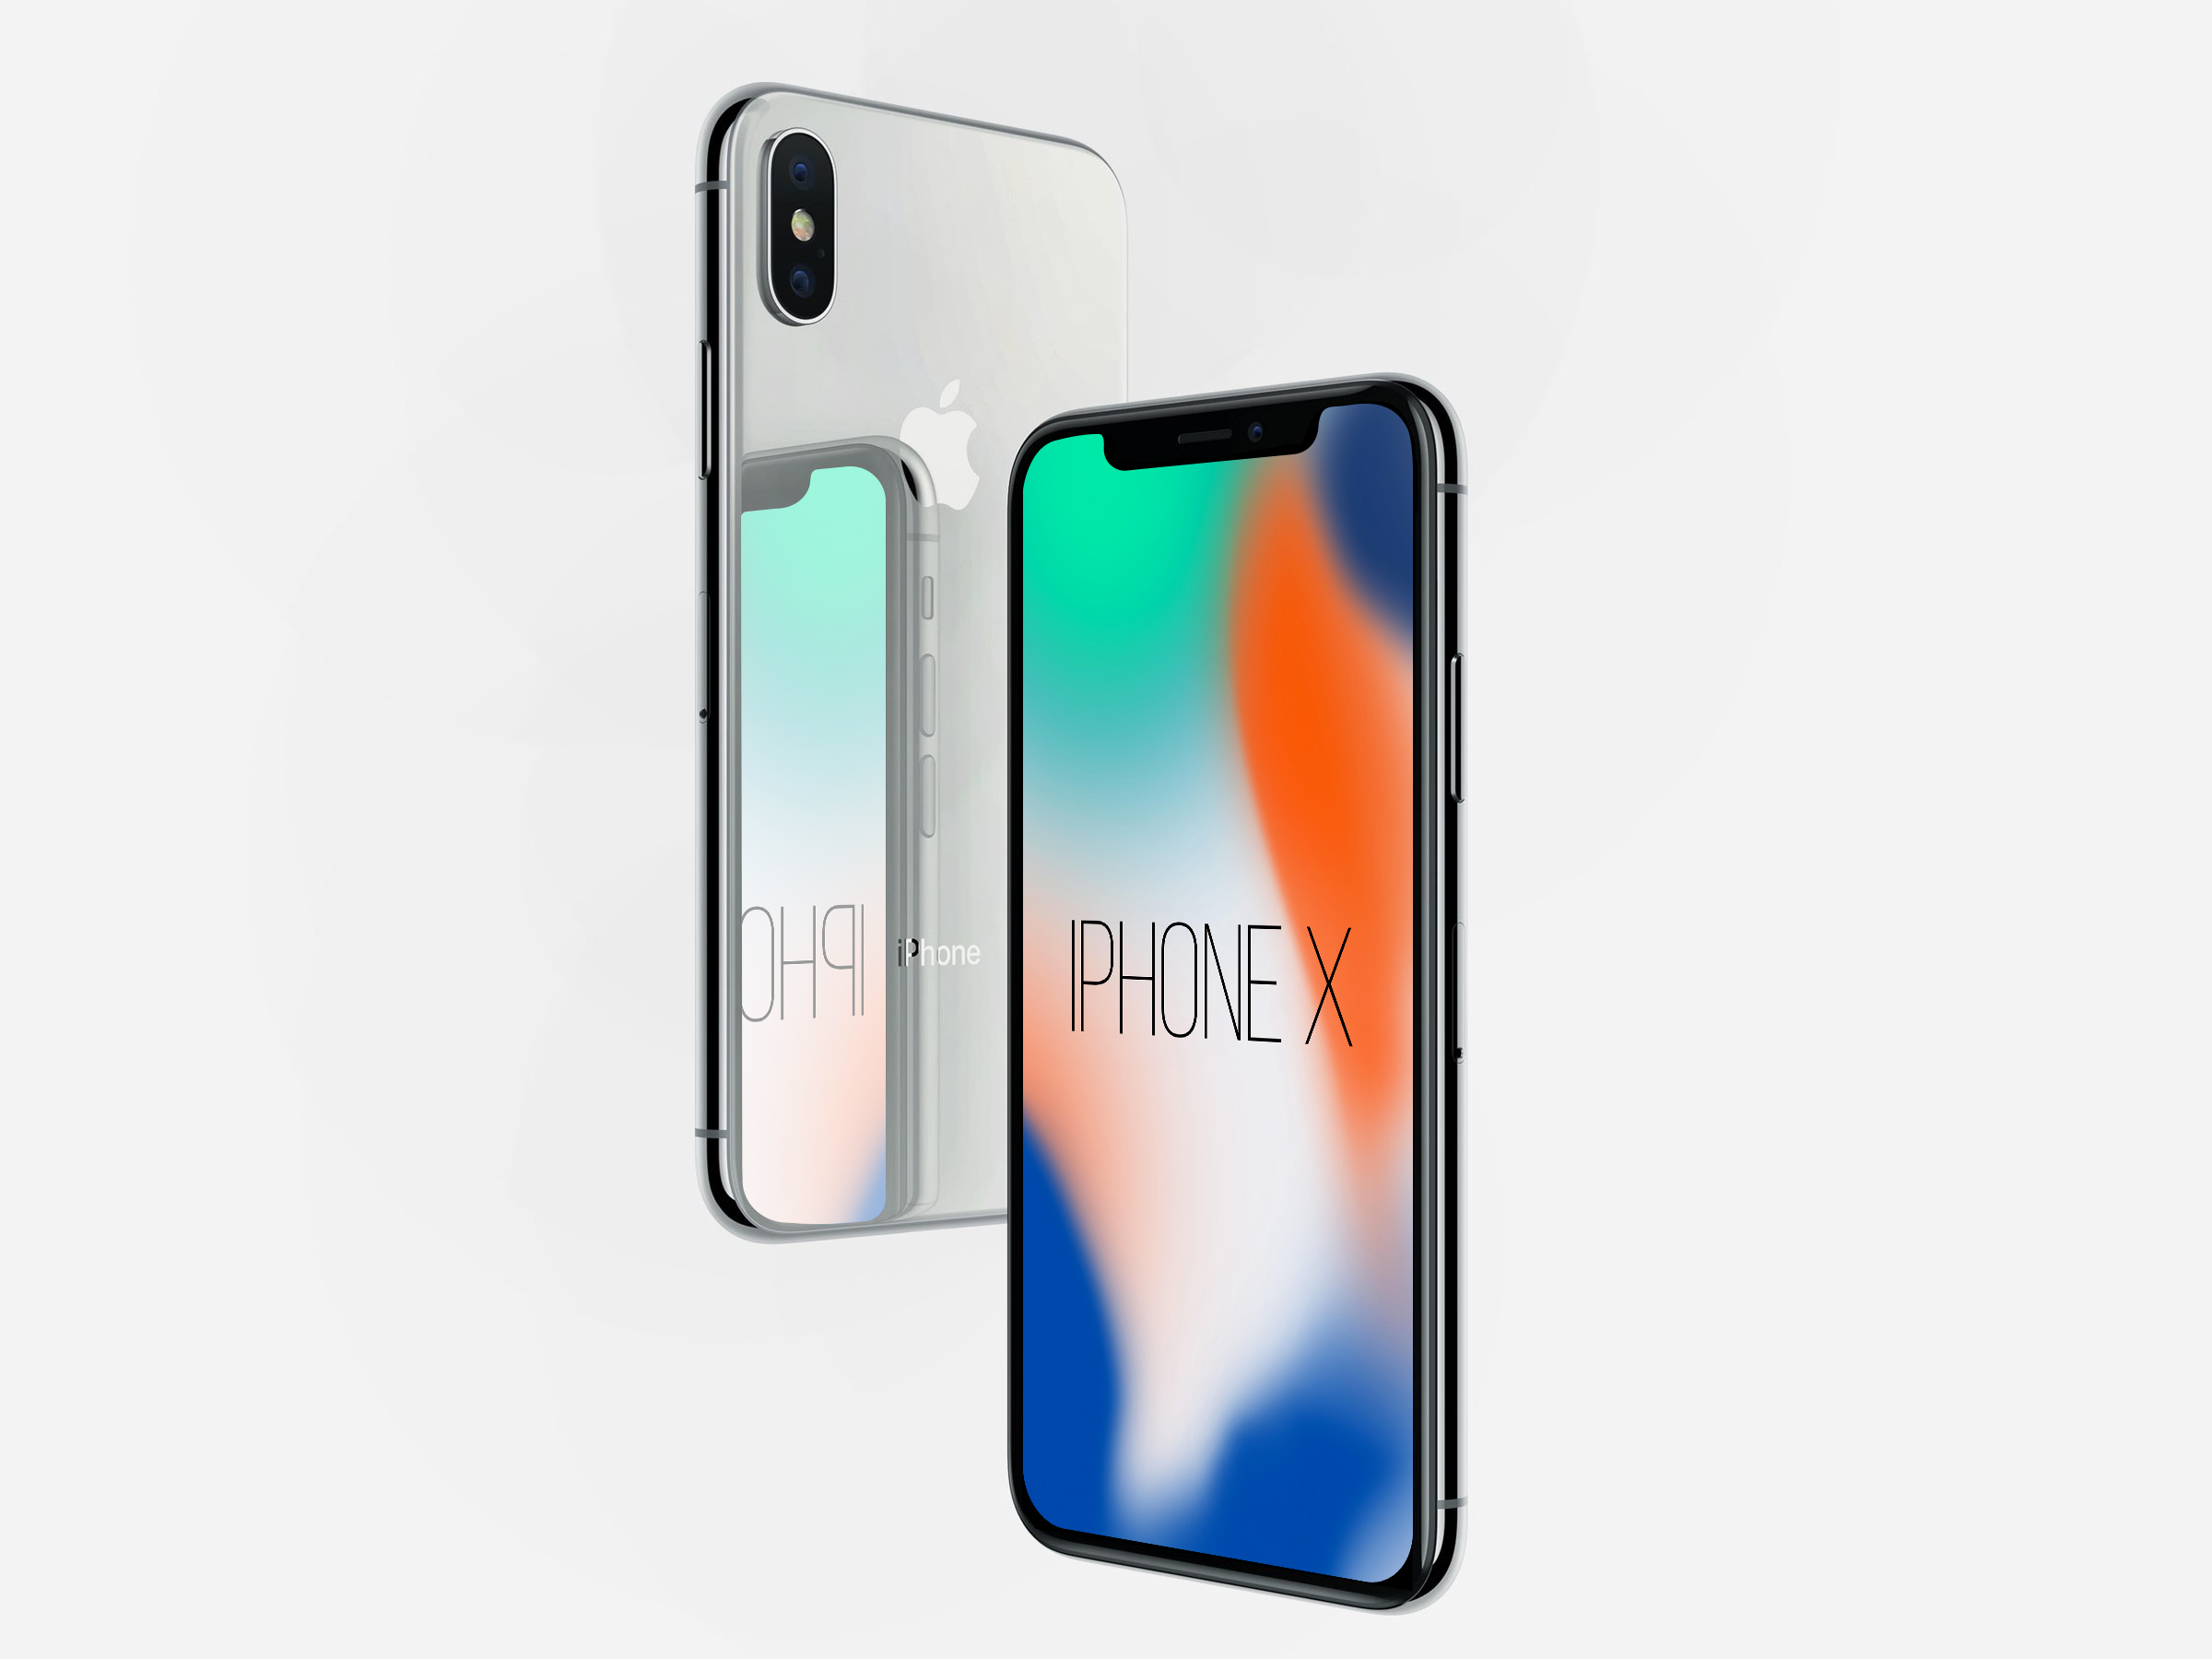 Free-iPhone-X-Perspective-Mockup